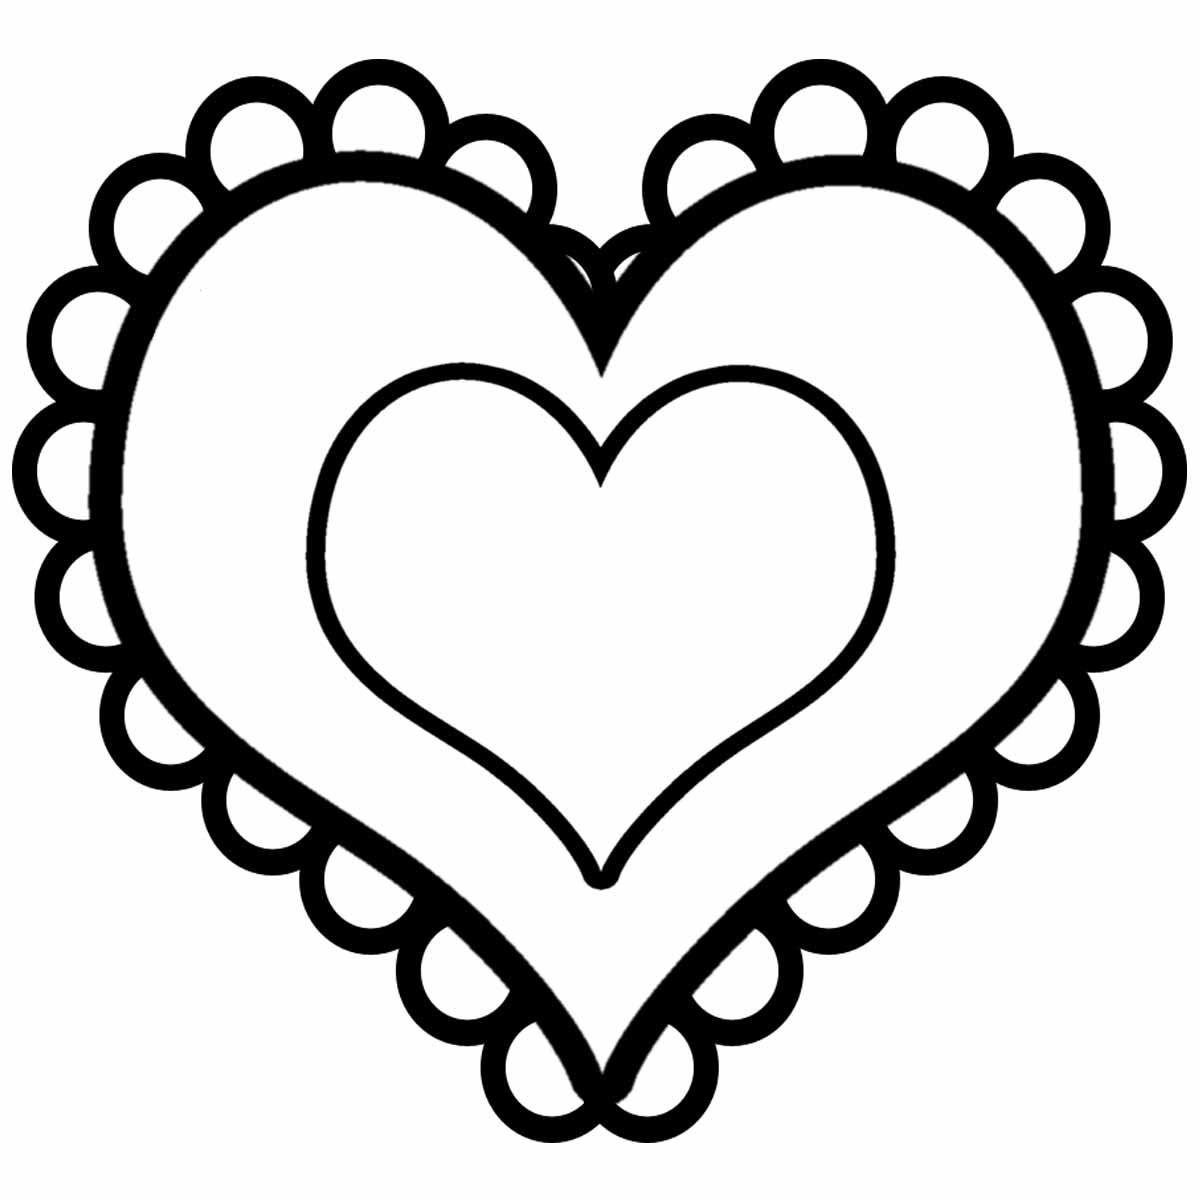 coloring picture of a heart free printable heart coloring pages for kids picture a coloring heart of 